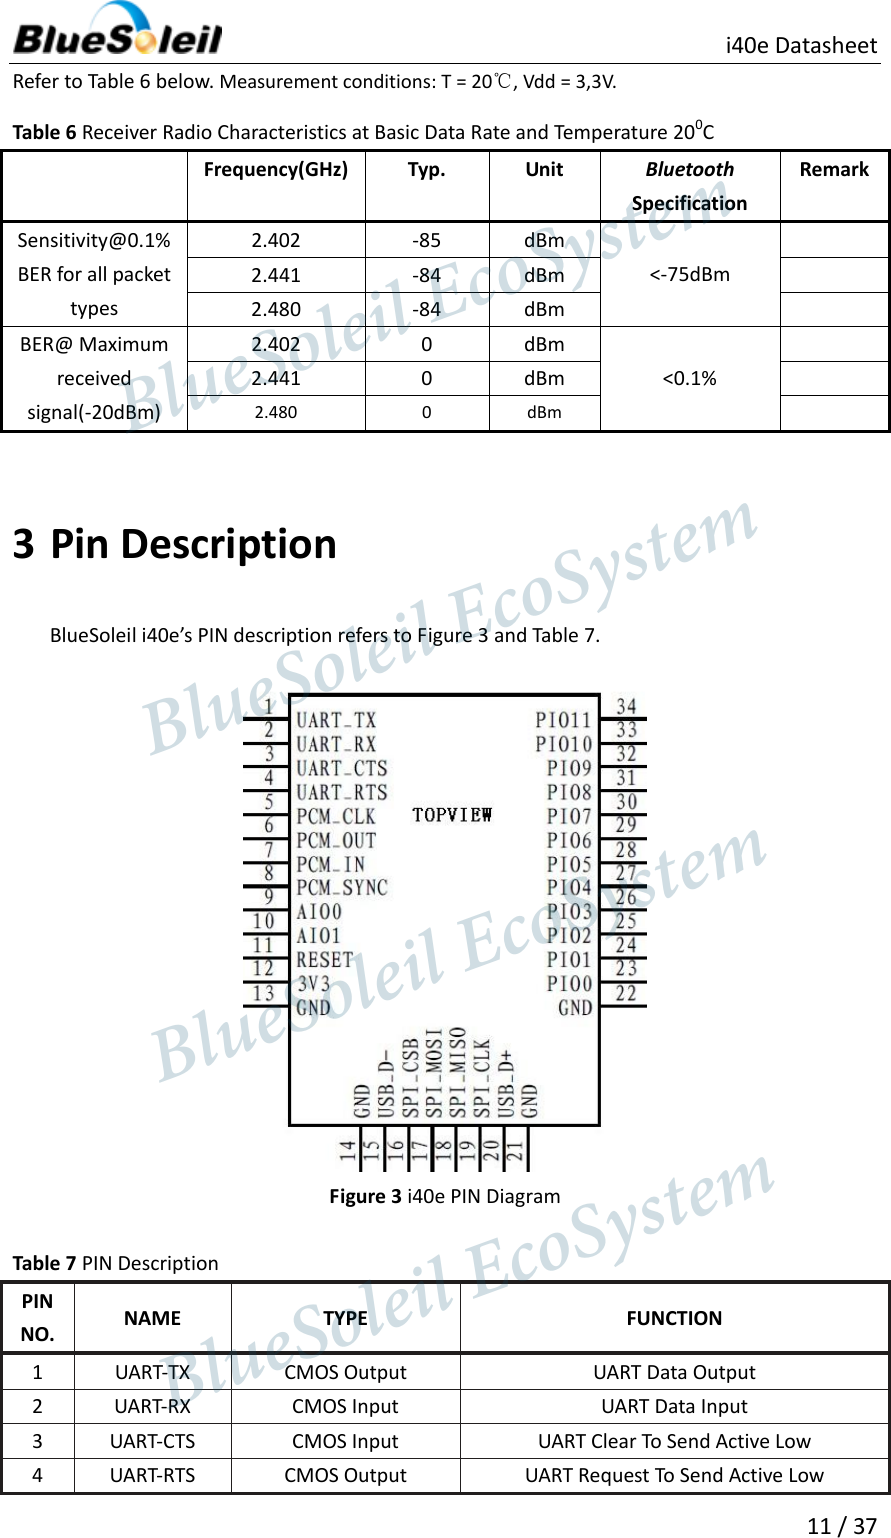                          i40e Datasheet  11 / 37  Refer to Table 6 below. Measurement conditions: T = 20℃, Vdd = 3,3V. Table 6 Receiver Radio Characteristics at Basic Data Rate and Temperature 200C  Frequency(GHz) Typ. Unit Bluetooth Specification Remark Sensitivity@0.1% BER for all packet types 2.402 -85 dBm  &lt;-75dBm  2.441 -84 dBm  2.480 -84 dBm  BER@ Maximum received signal(-20dBm) 2.402 0 dBm  &lt;0.1%  2.441 0 dBm  2.480 0 dBm   3 Pin Description BlueSoleil i40e’s PIN description refers to Figure 3 and Table 7.  Figure 3 i40e PIN Diagram  Table 7 PIN Description PIN NO. NAME TYPE FUNCTION   1 UART-TX CMOS Output UART Data Output 2 UART-RX CMOS Input UART Data Input 3 UART-CTS CMOS Input UART Clear To Send Active Low 4 UART-RTS CMOS Output UART Request To Send Active Low                  BlueSoleil EcoSystem            BlueSoleil EcoSystem      BlueSoleil EcoSystemBlueSoleil EcoSystem